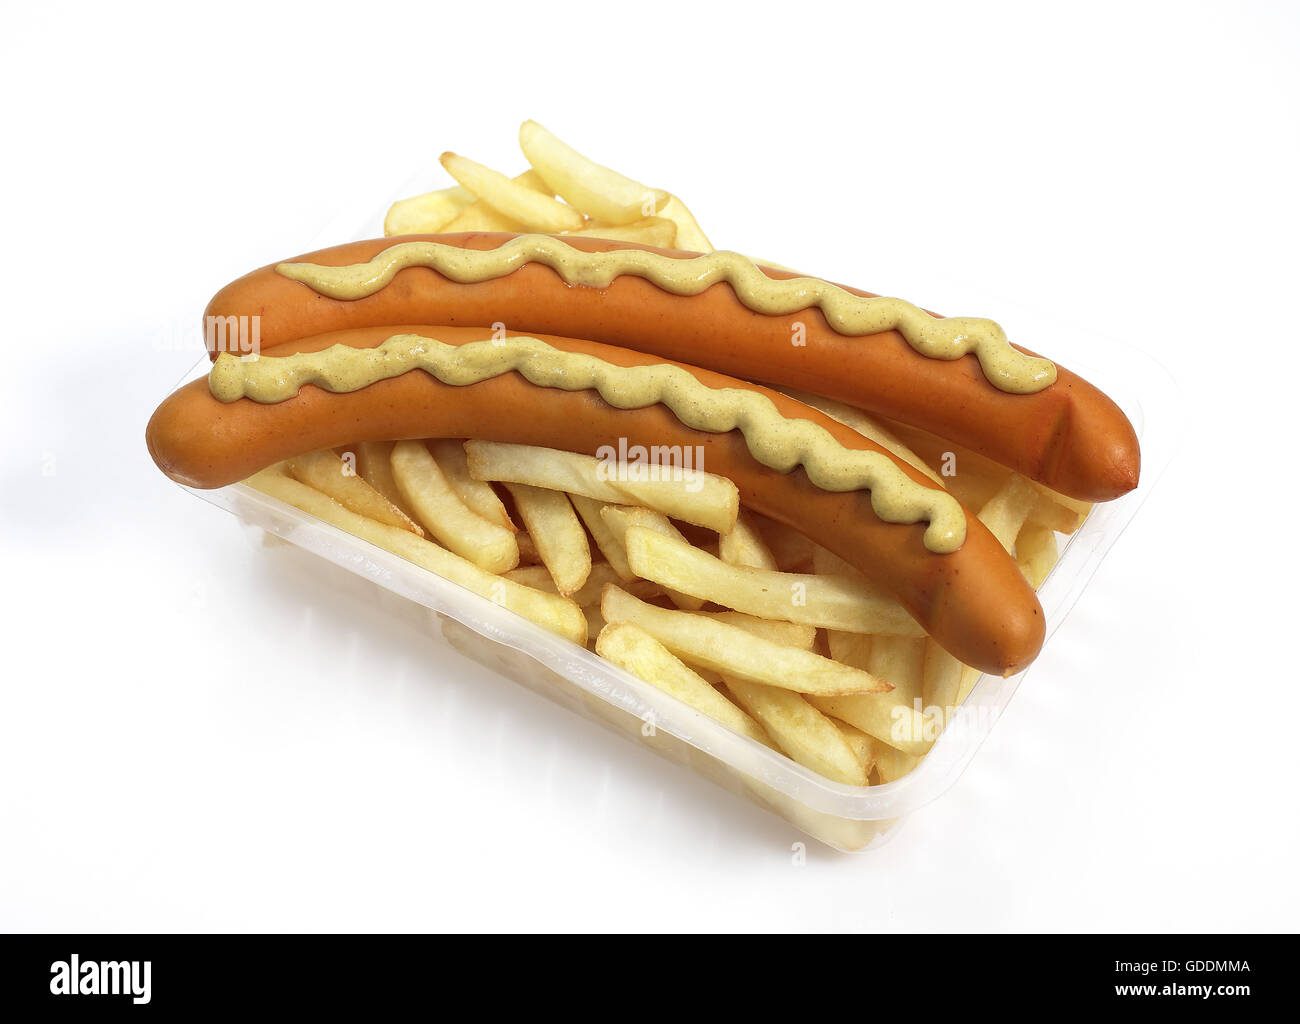 Strasburg Sausages With Mustard and French Fries against White Background Stock Photo